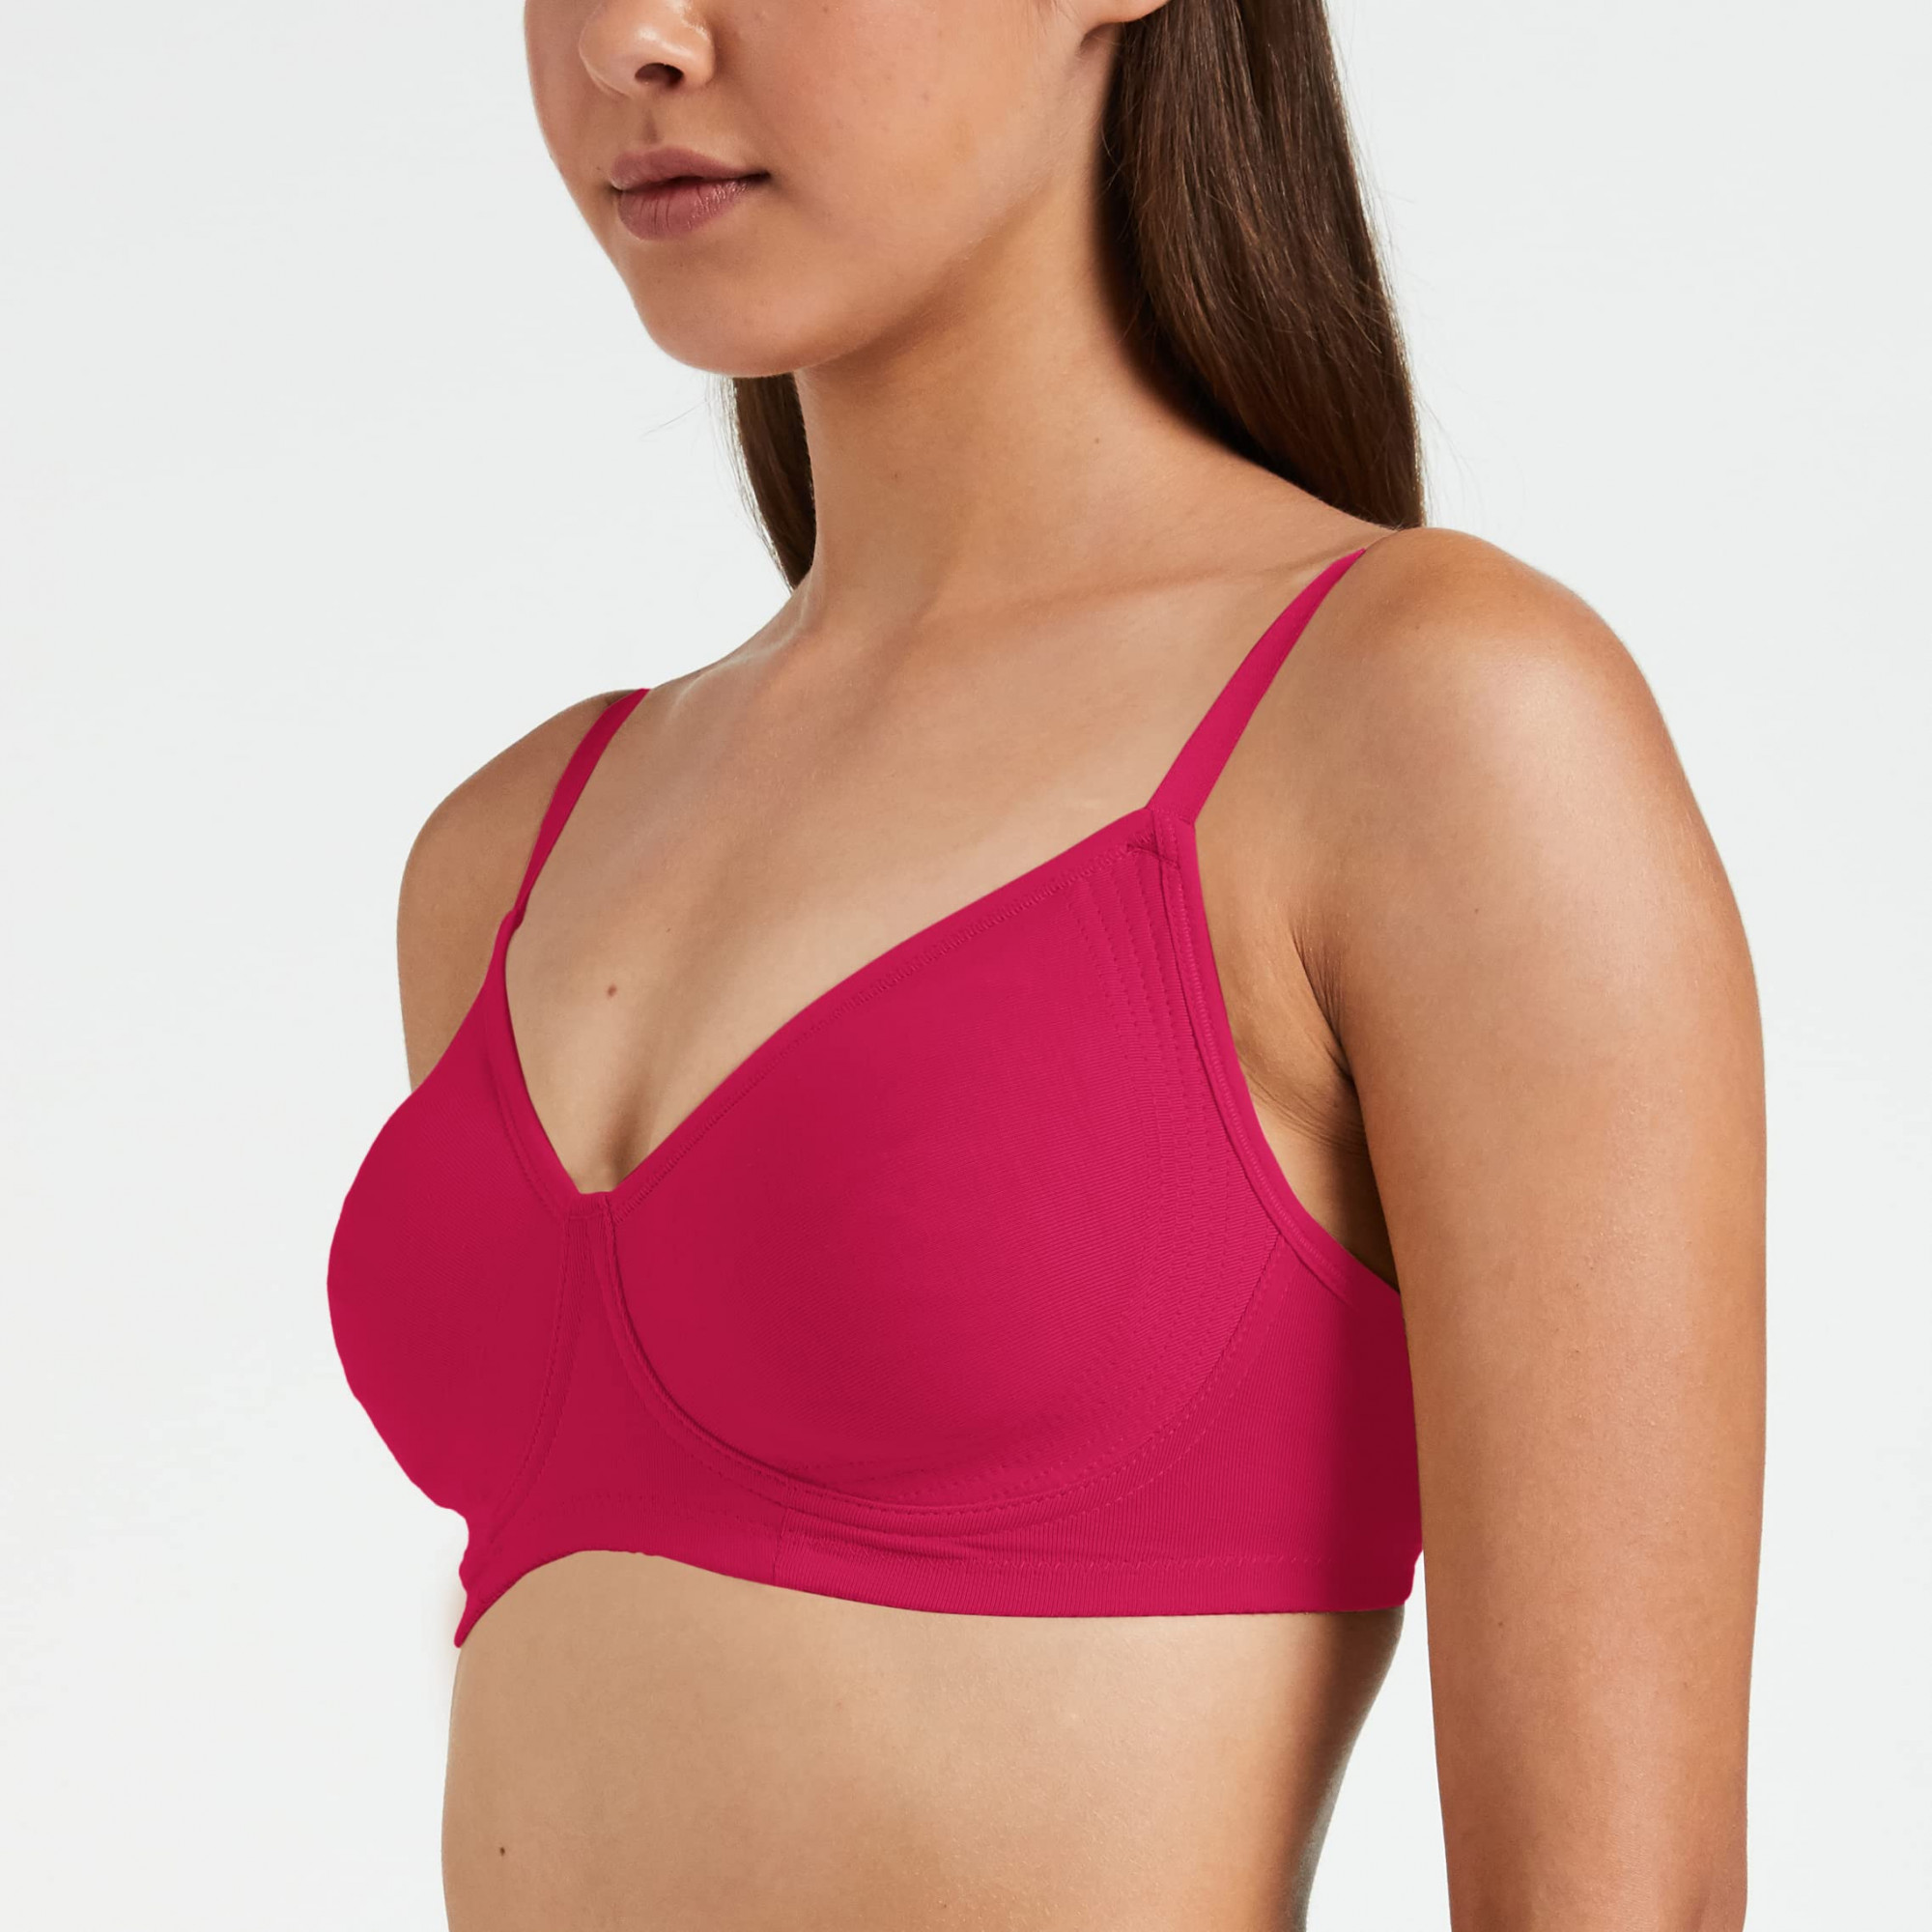 https://www.fastemi.com/uploads/fastemicom/products/enamor-a042-side-support-shaper-stretch-cotton-everyday-bra---non-padded-wire-free-amp-high-coveragesize-36b-160932969658131_l.jpg